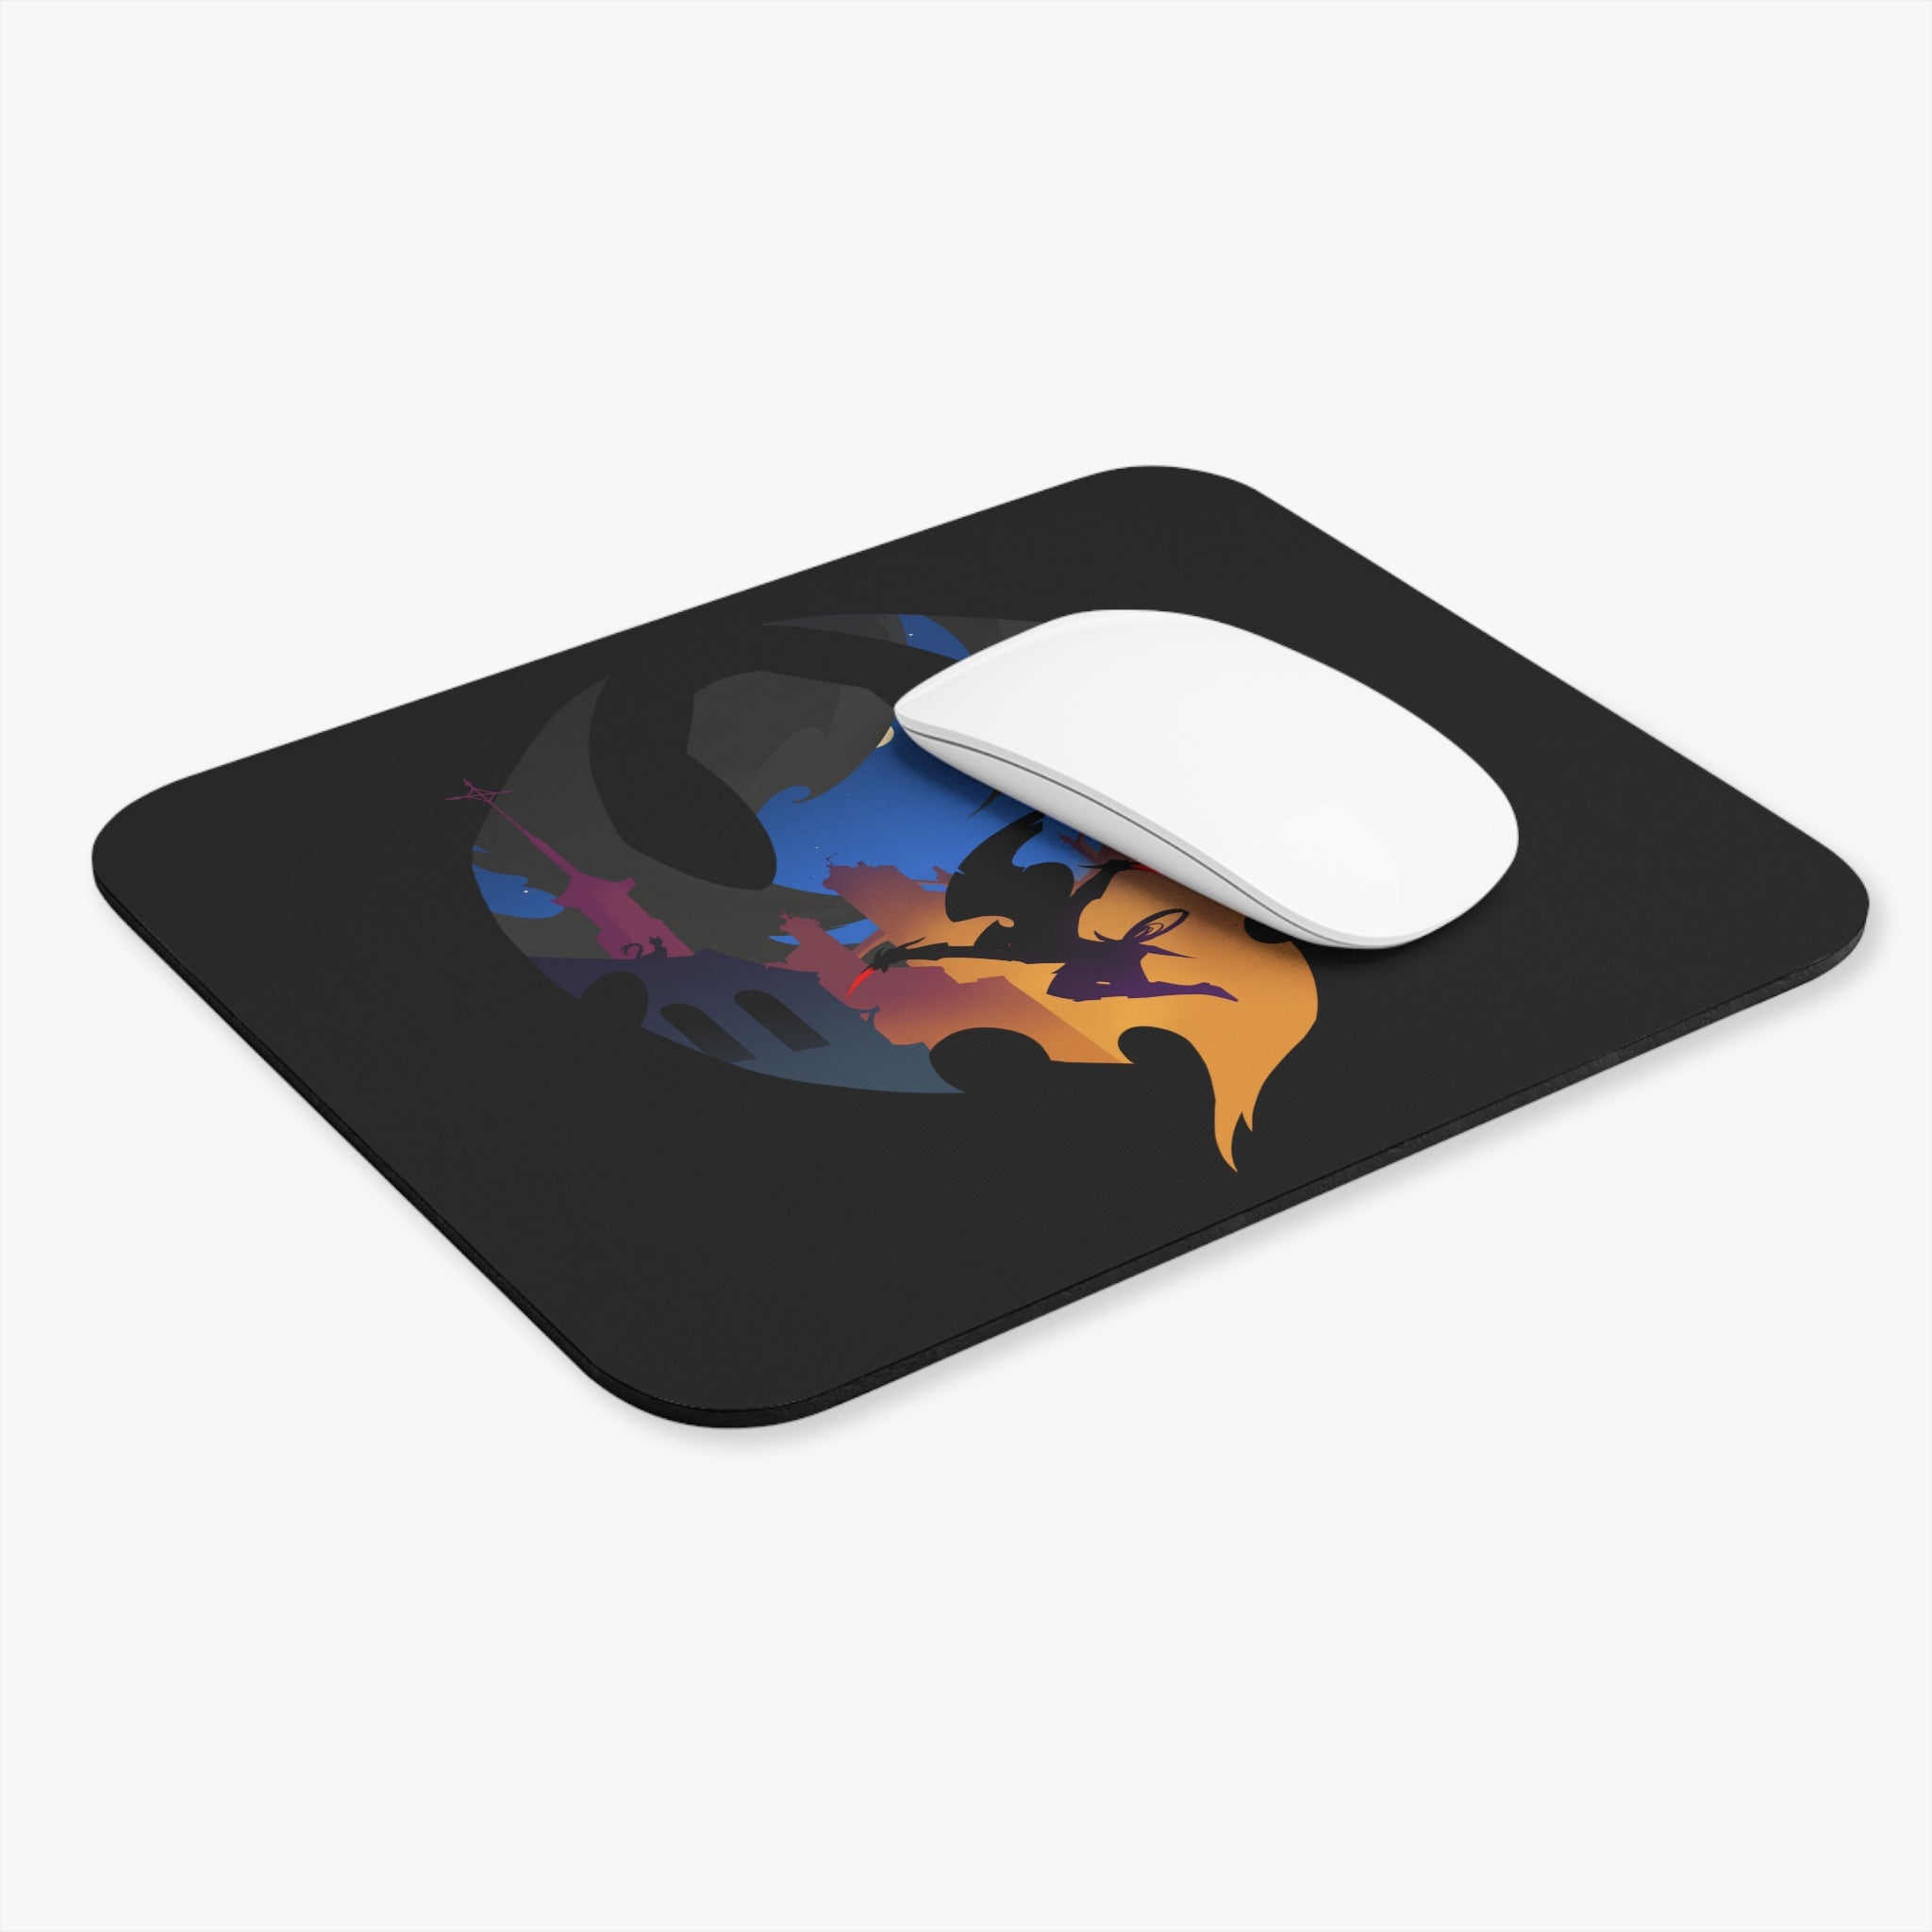 ROGUE CLASS SILHOUETTE RECTANGLER MOUSE PAD